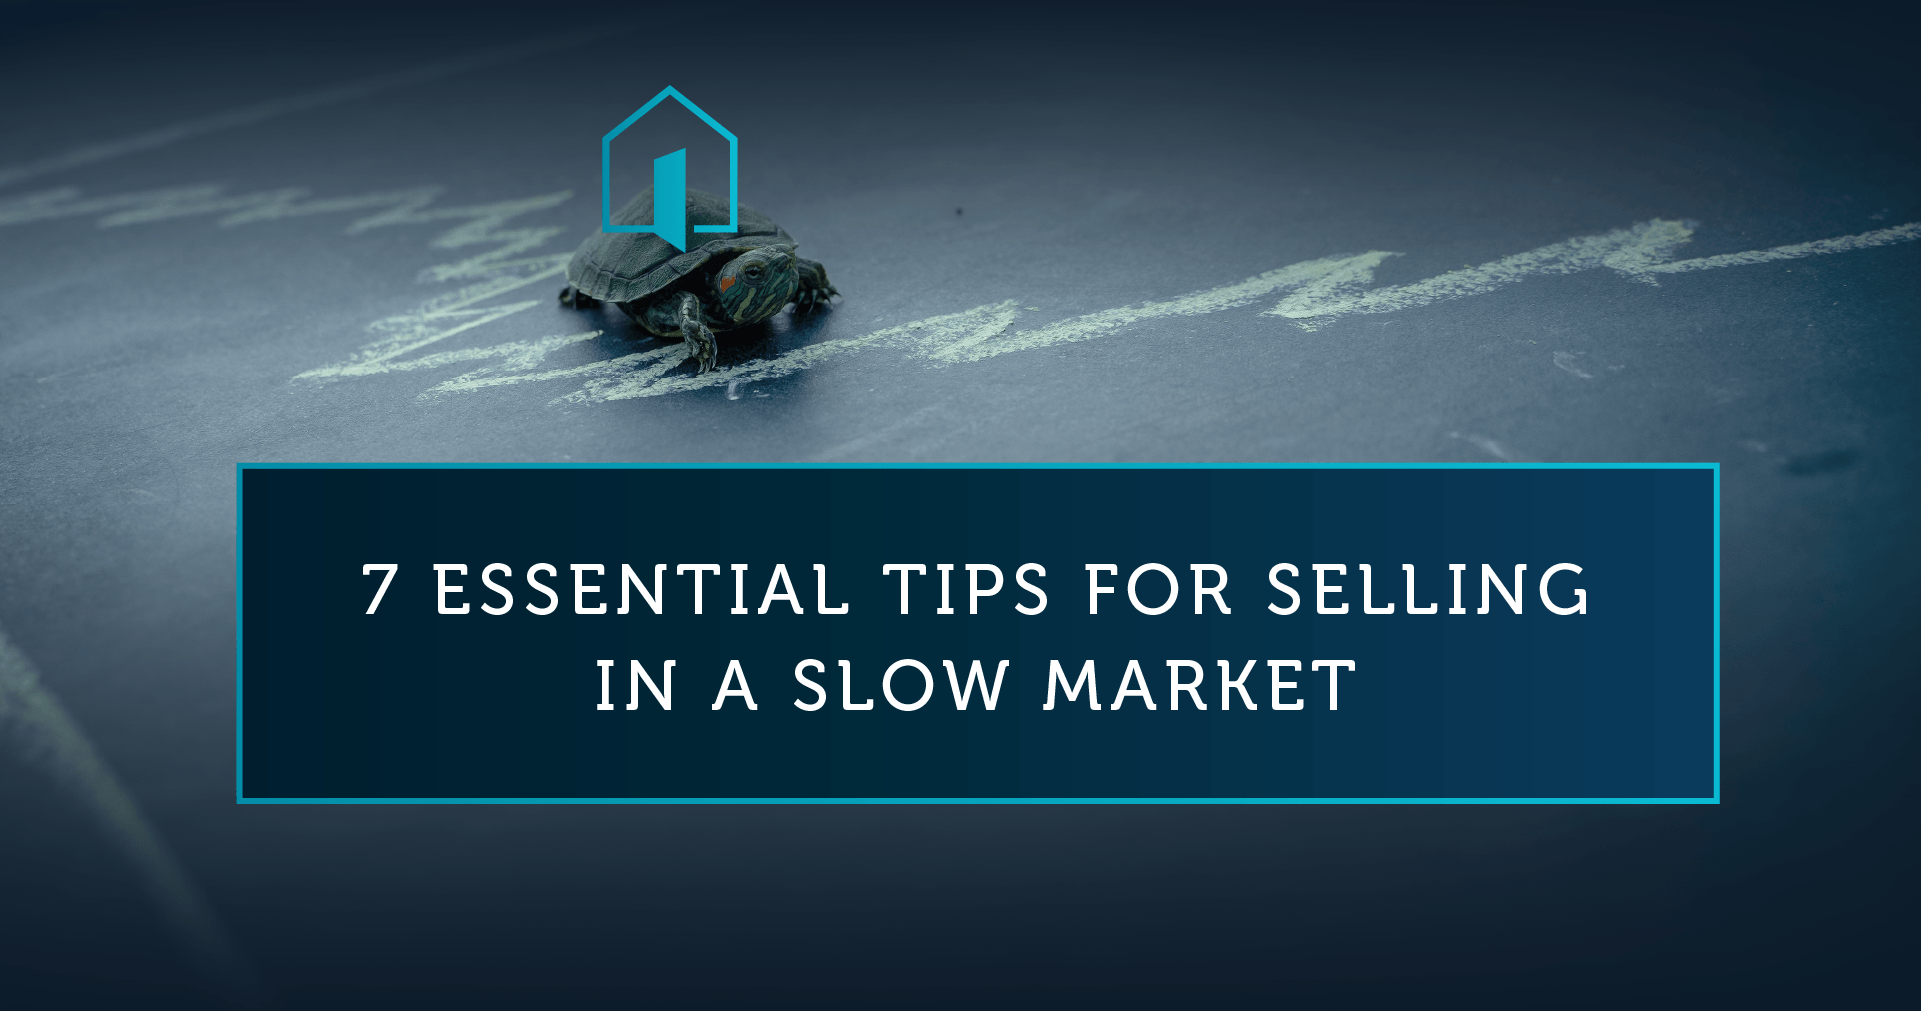 7 Essential Tips for Selling in a Slow Market